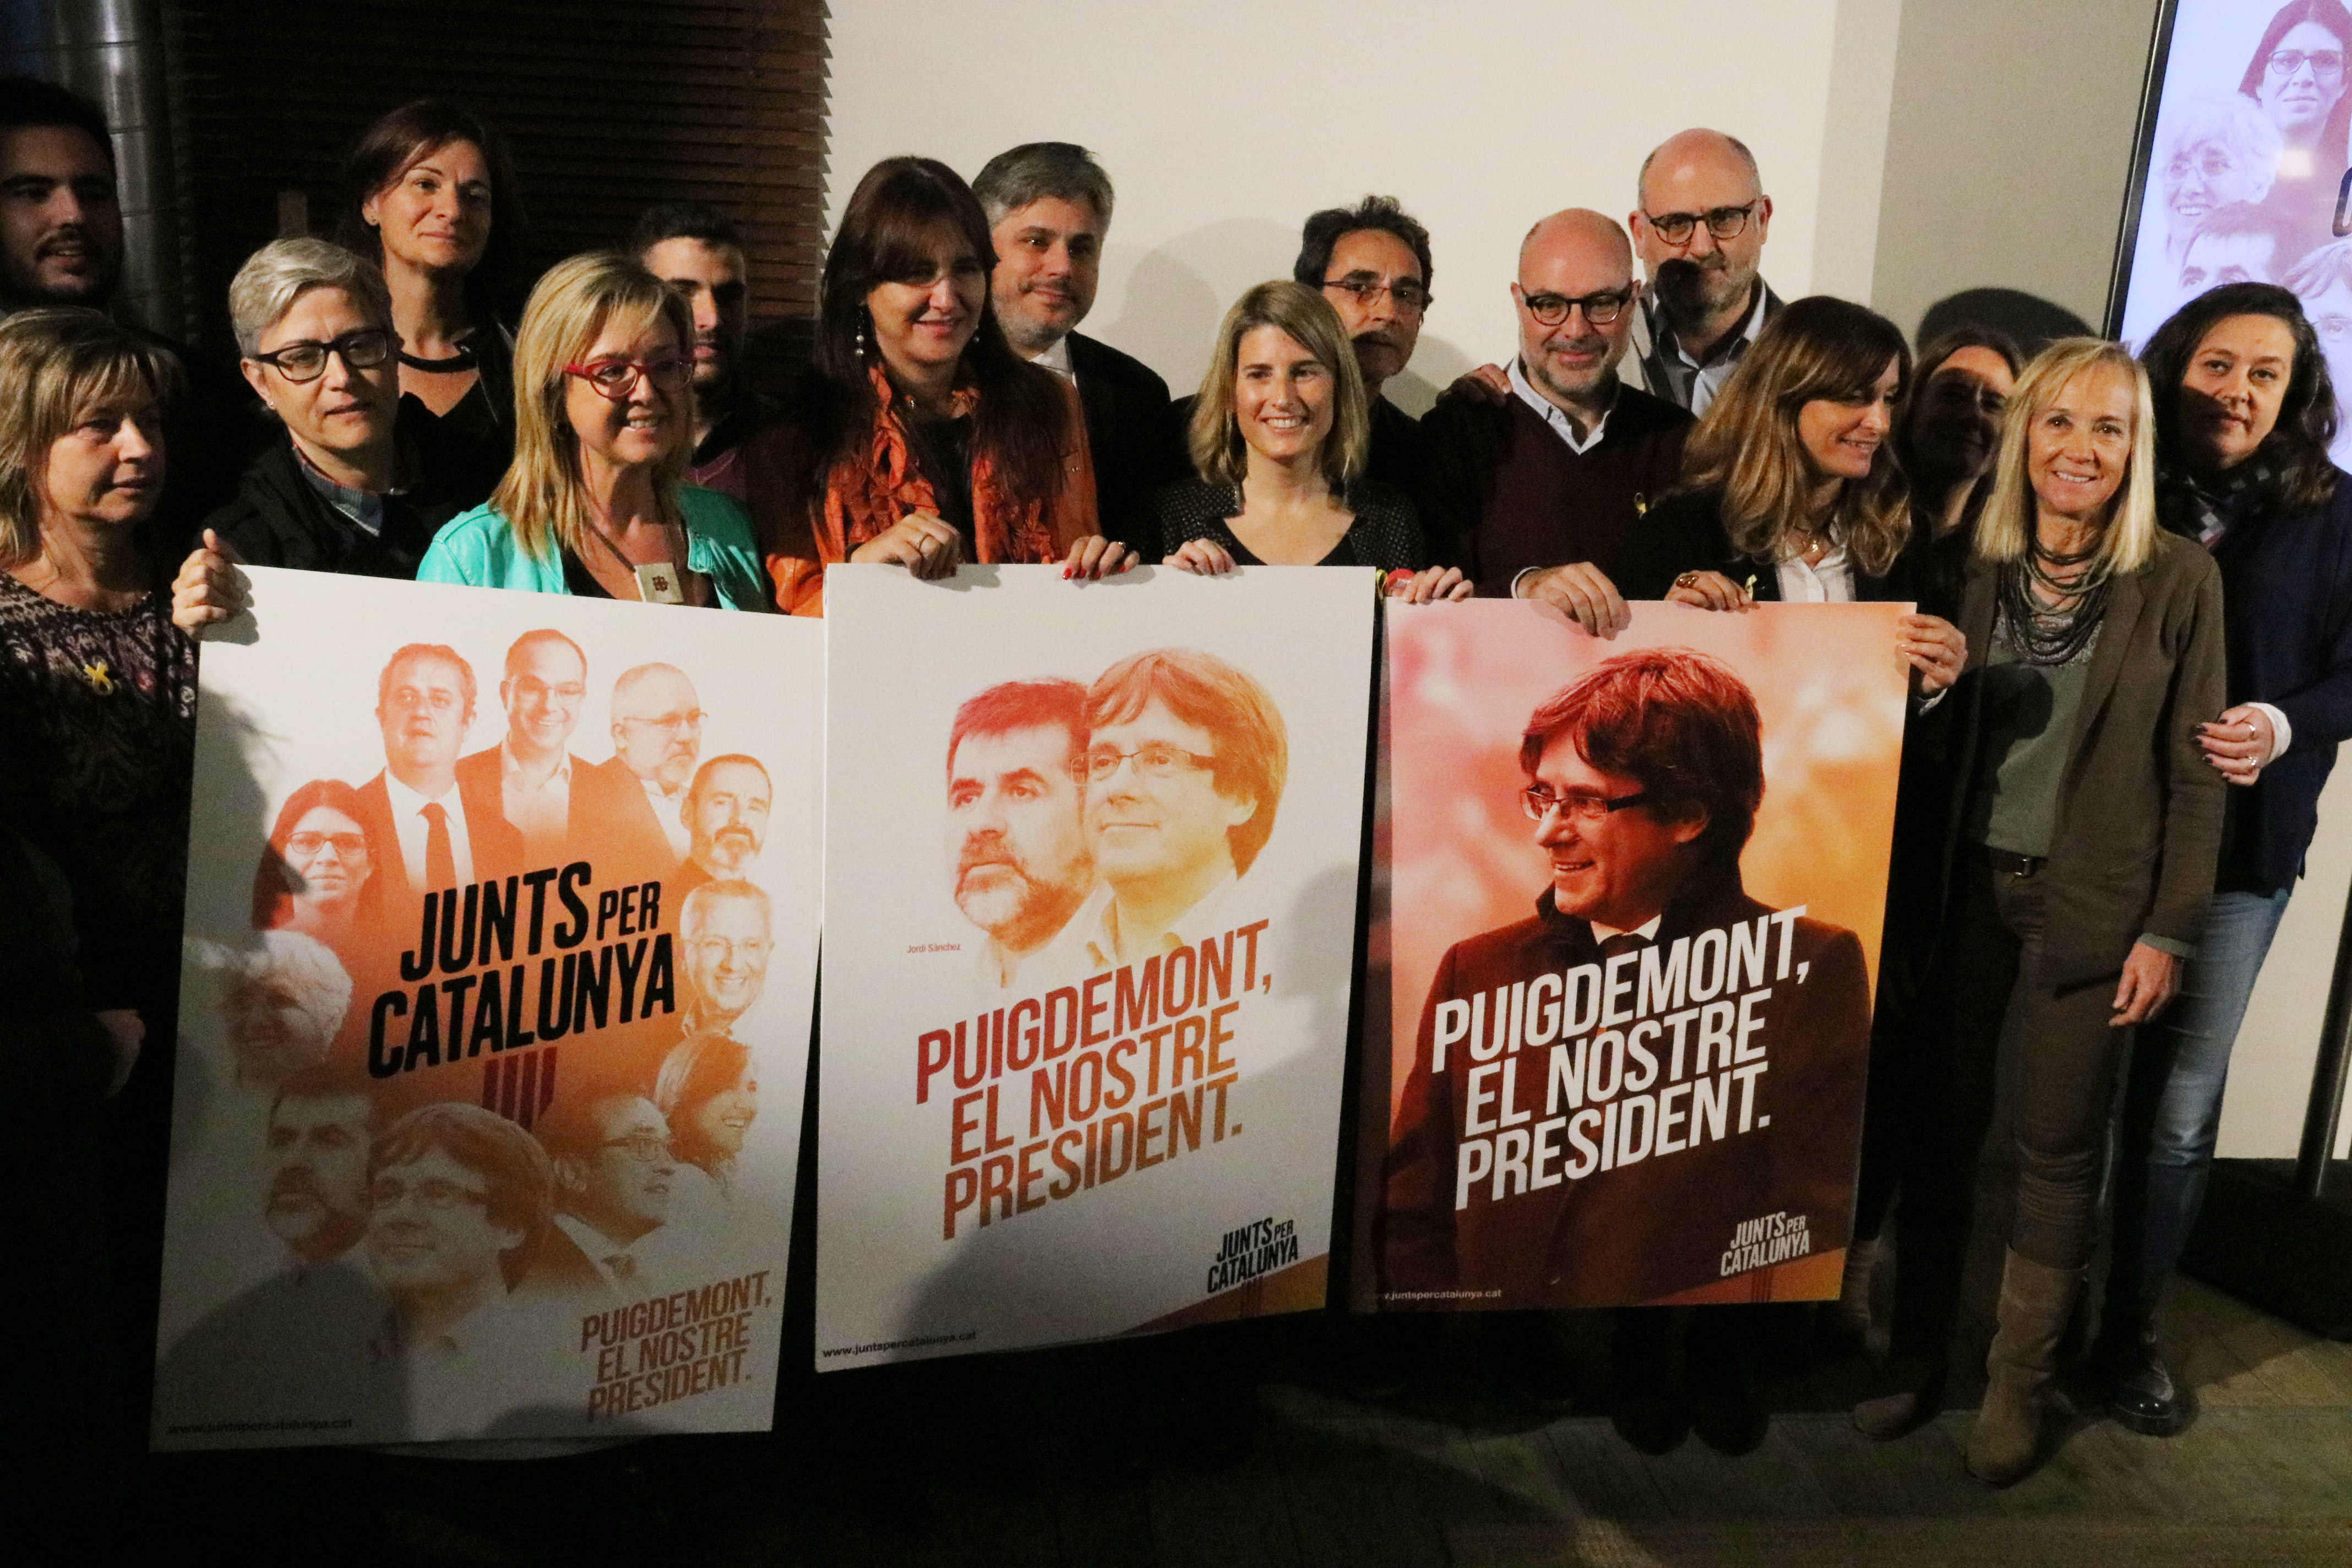 Memebers of the pro-independence Together for Catalonia candidacy pose for a photo with their campaign posters on November 28, 2017 (by Jordi Bataller)